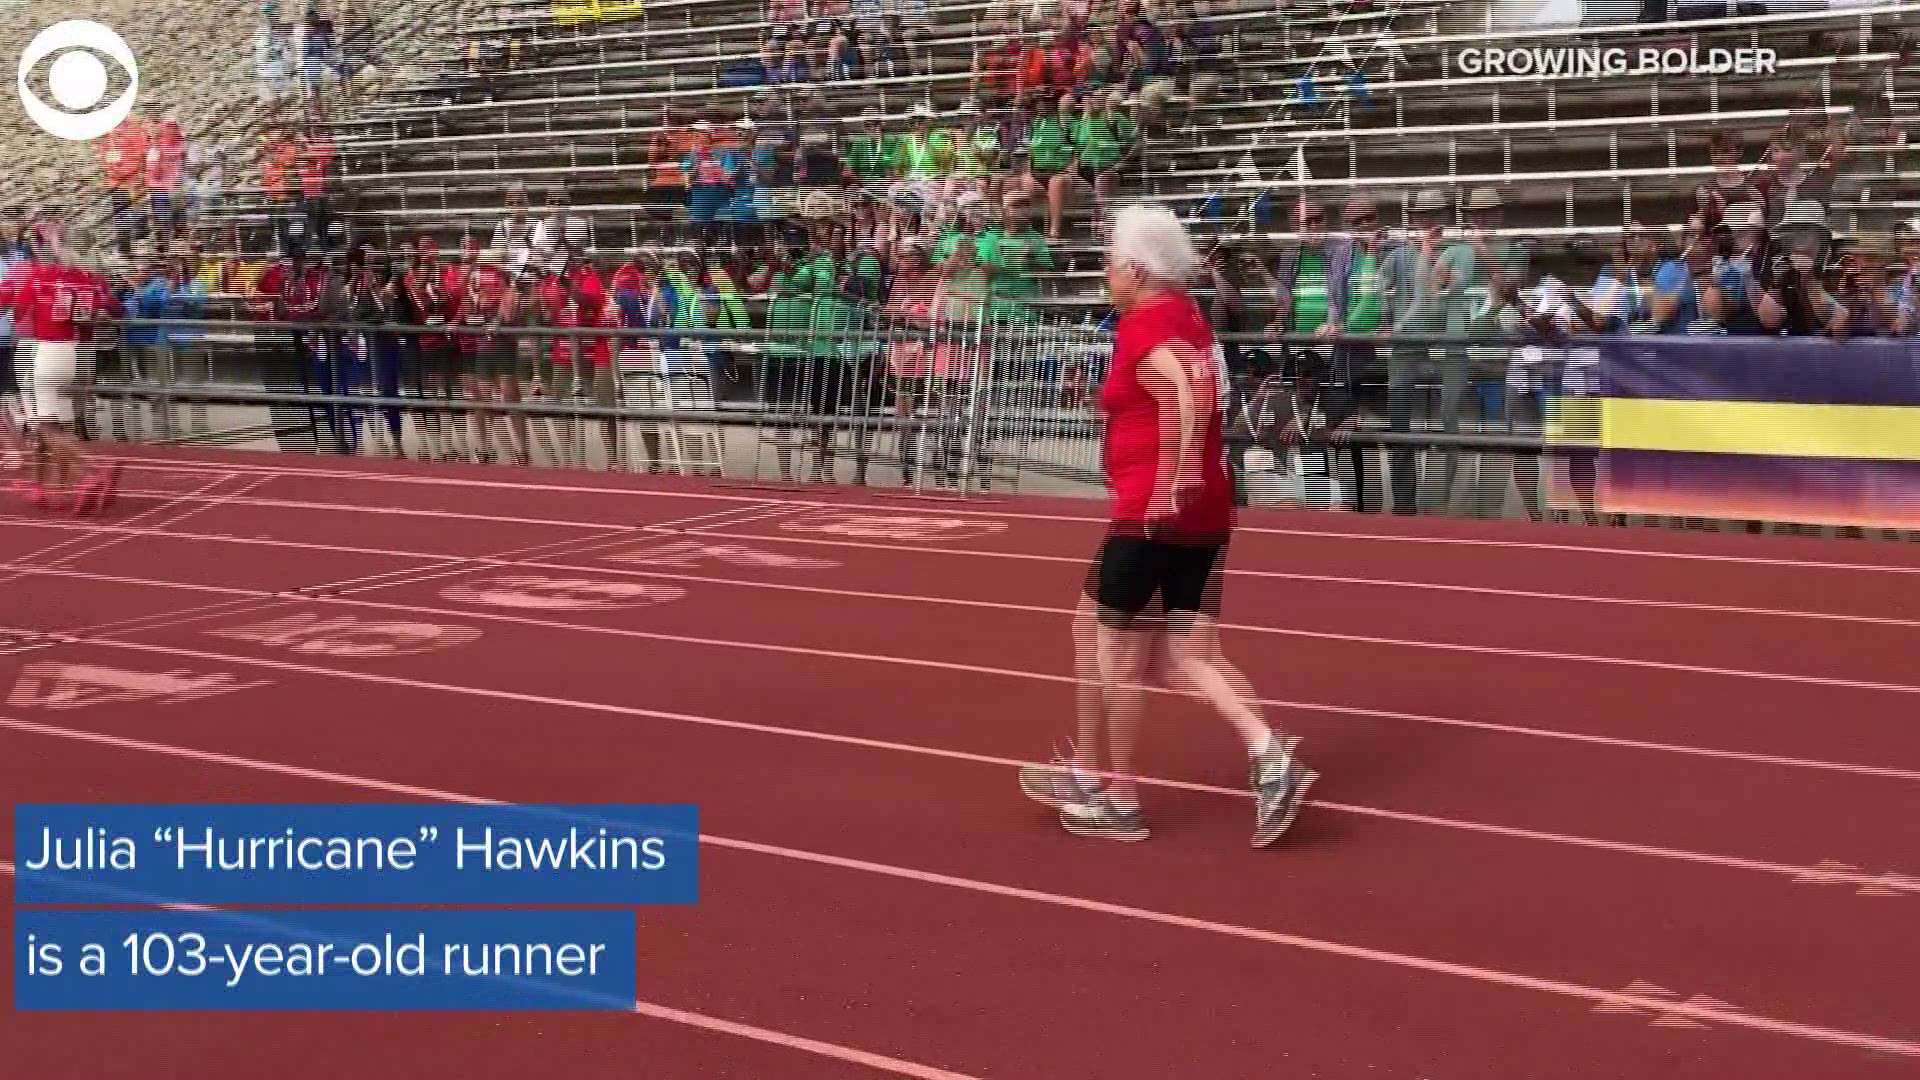 Meet Julia “Hurricane” Hawkins, a 103-year old record-breaking runner. She's the oldest American female track and field competitor, according to USA Track and Field.